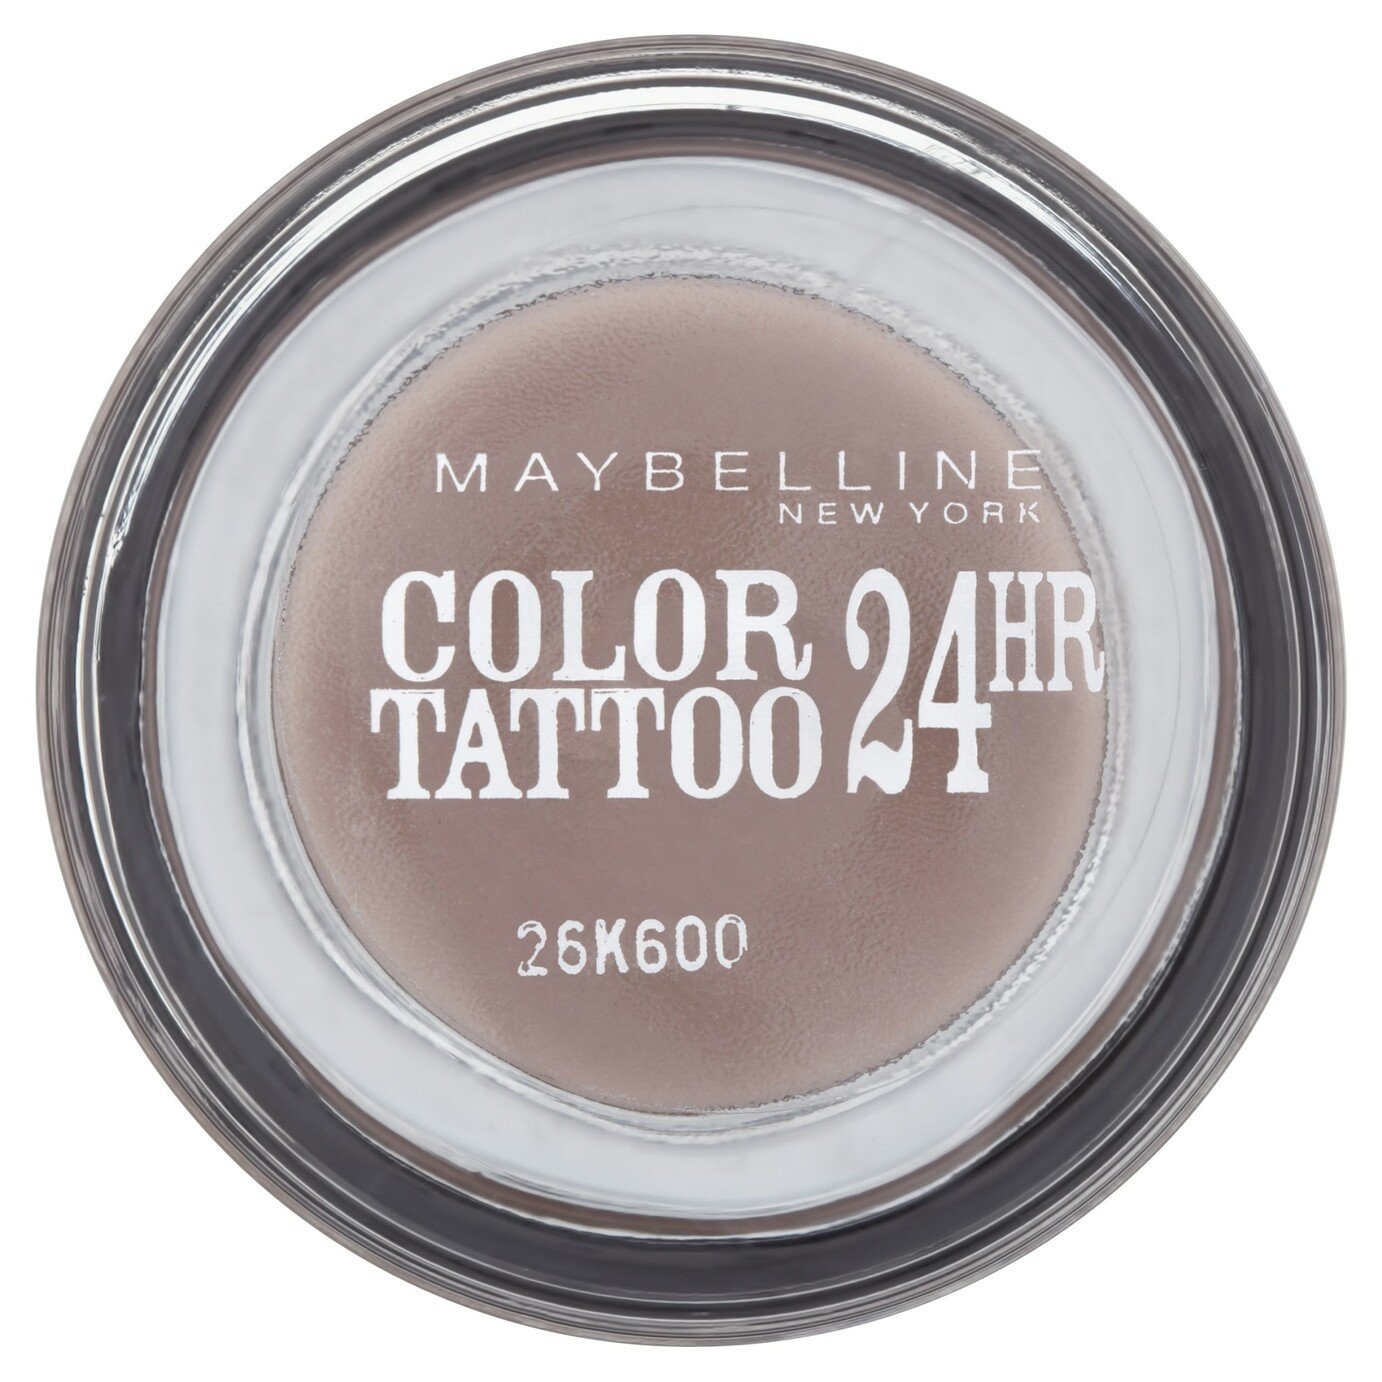 Maybellline Color Tattoo24hr Eyeshadow Permanent - 40 Taupe